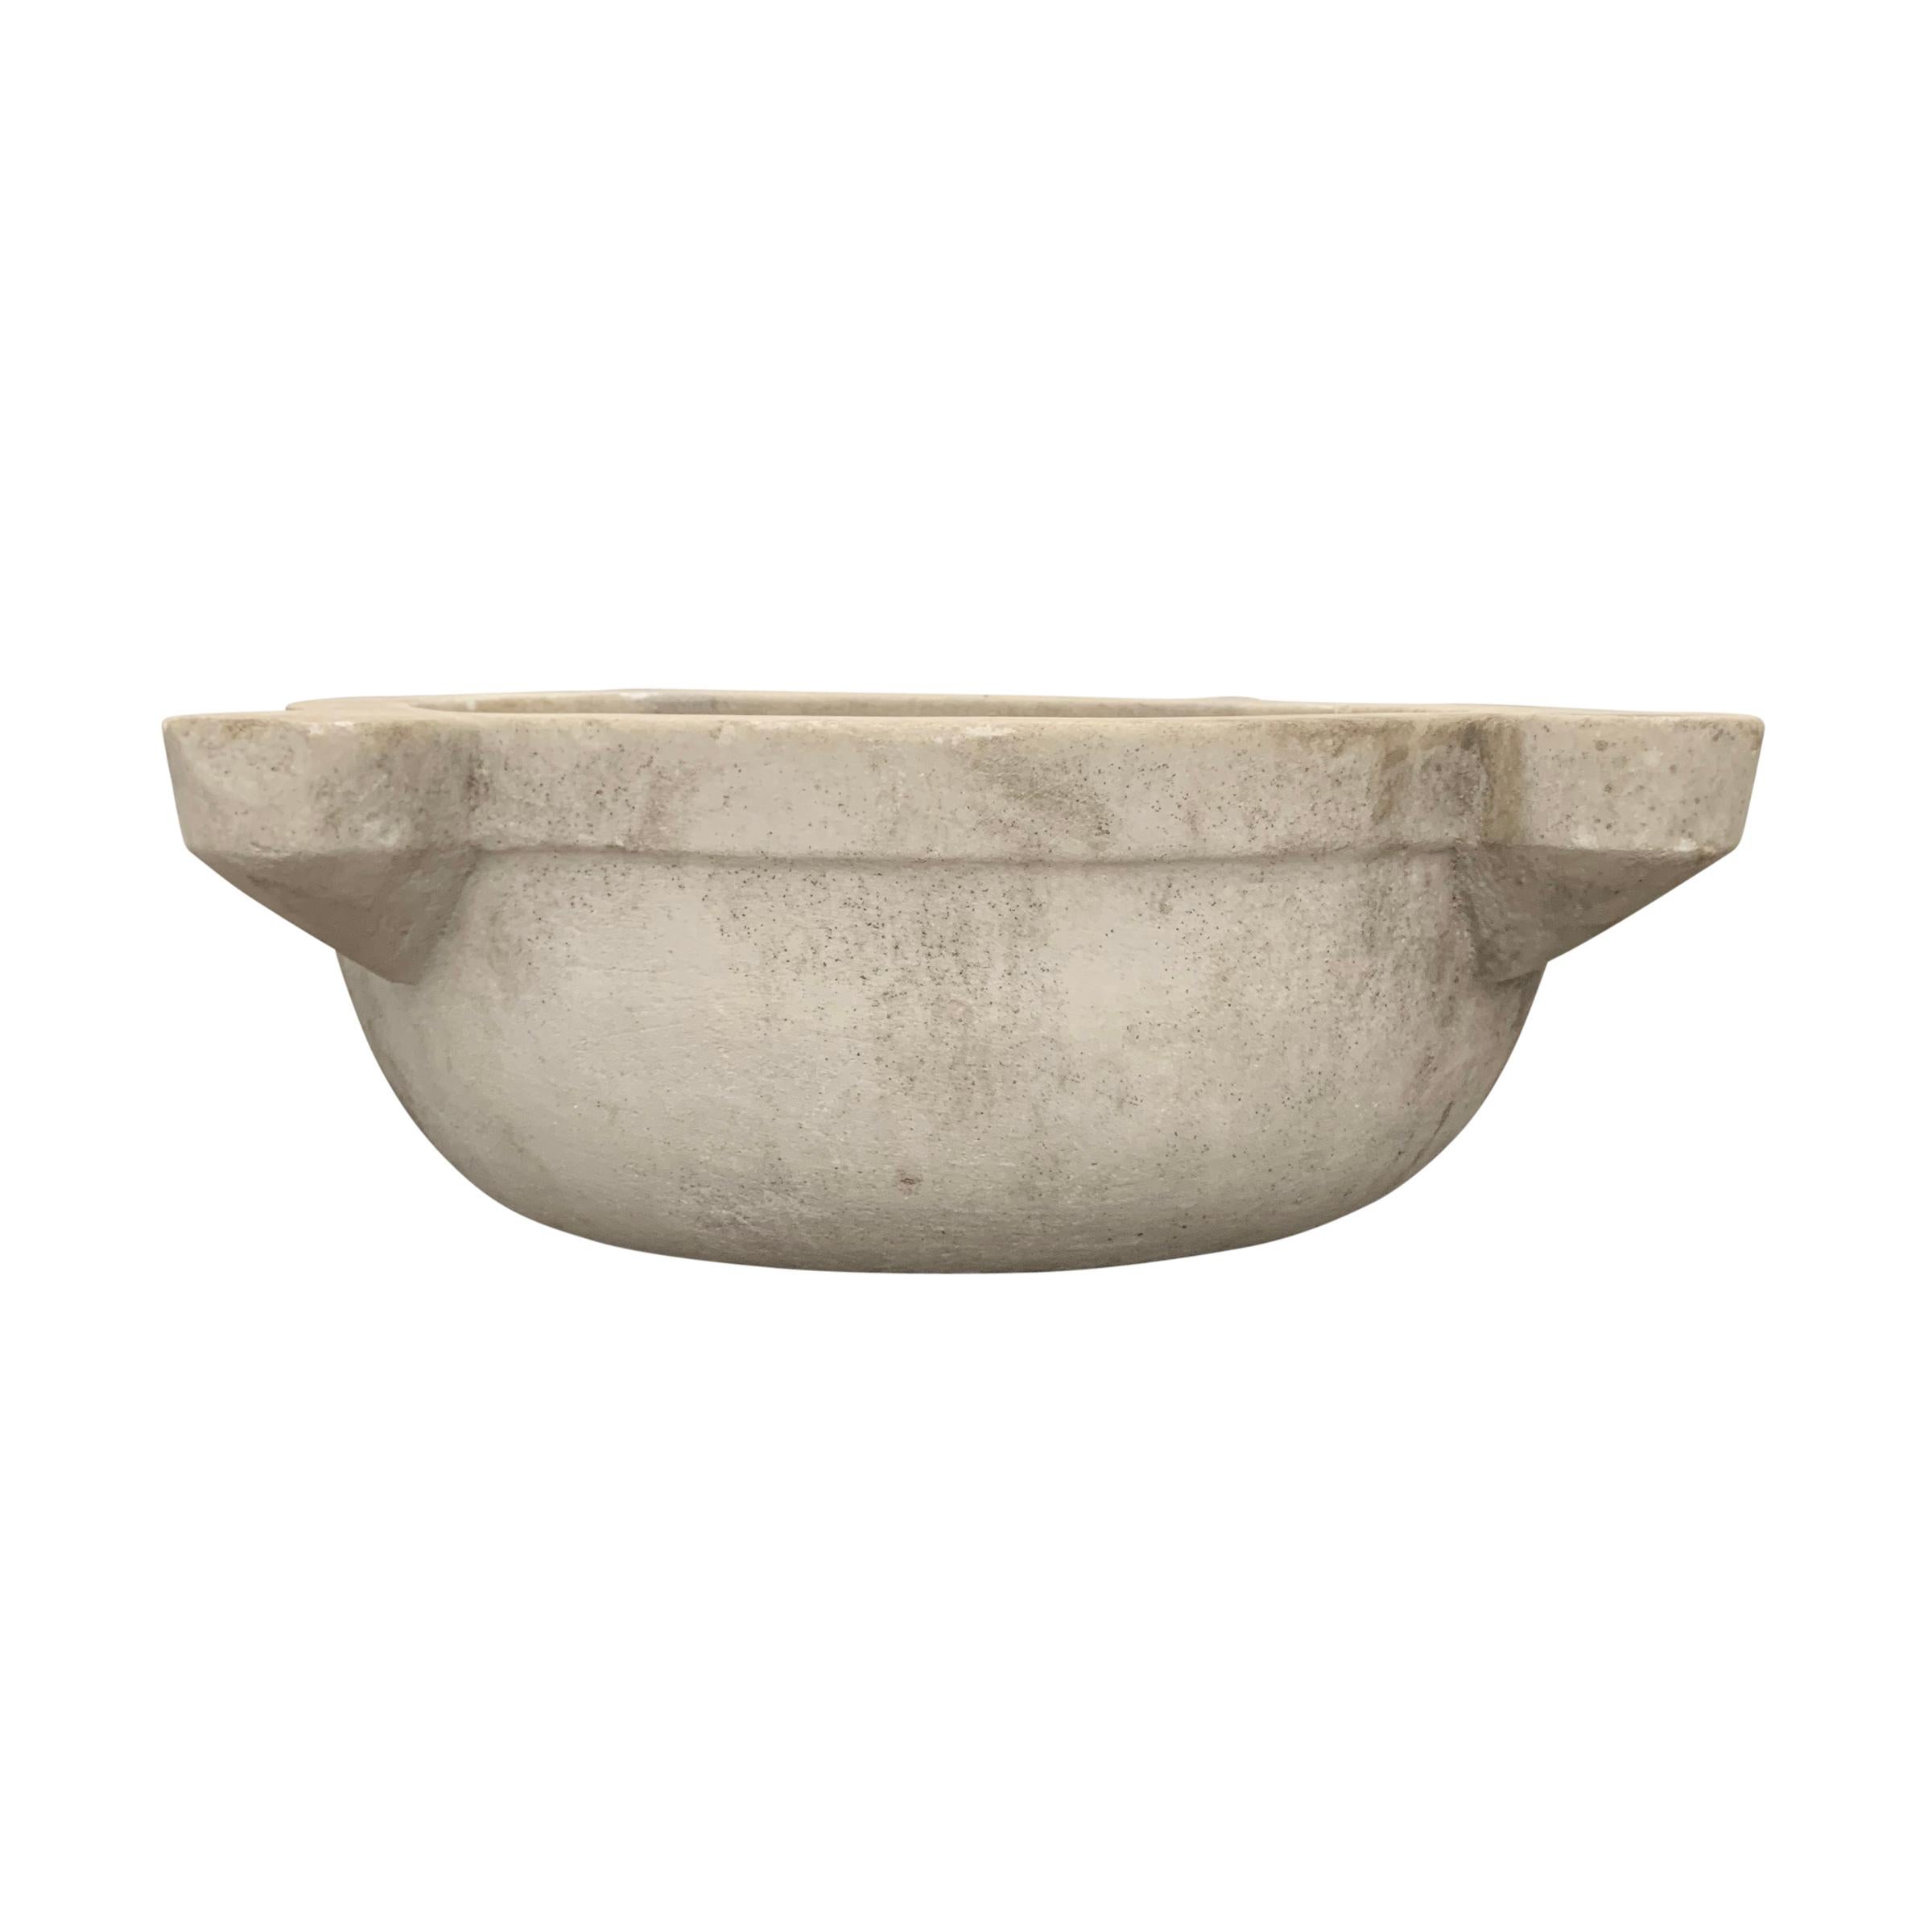 A wonderful 18th century Turkish Hammam carved white marble sink vessel with a wonderfully worn finish. A drain could be drilled in the bottom to convert into a sink.

Interior dimension: 16 in. W x 12 in. D x 6.5in. H.